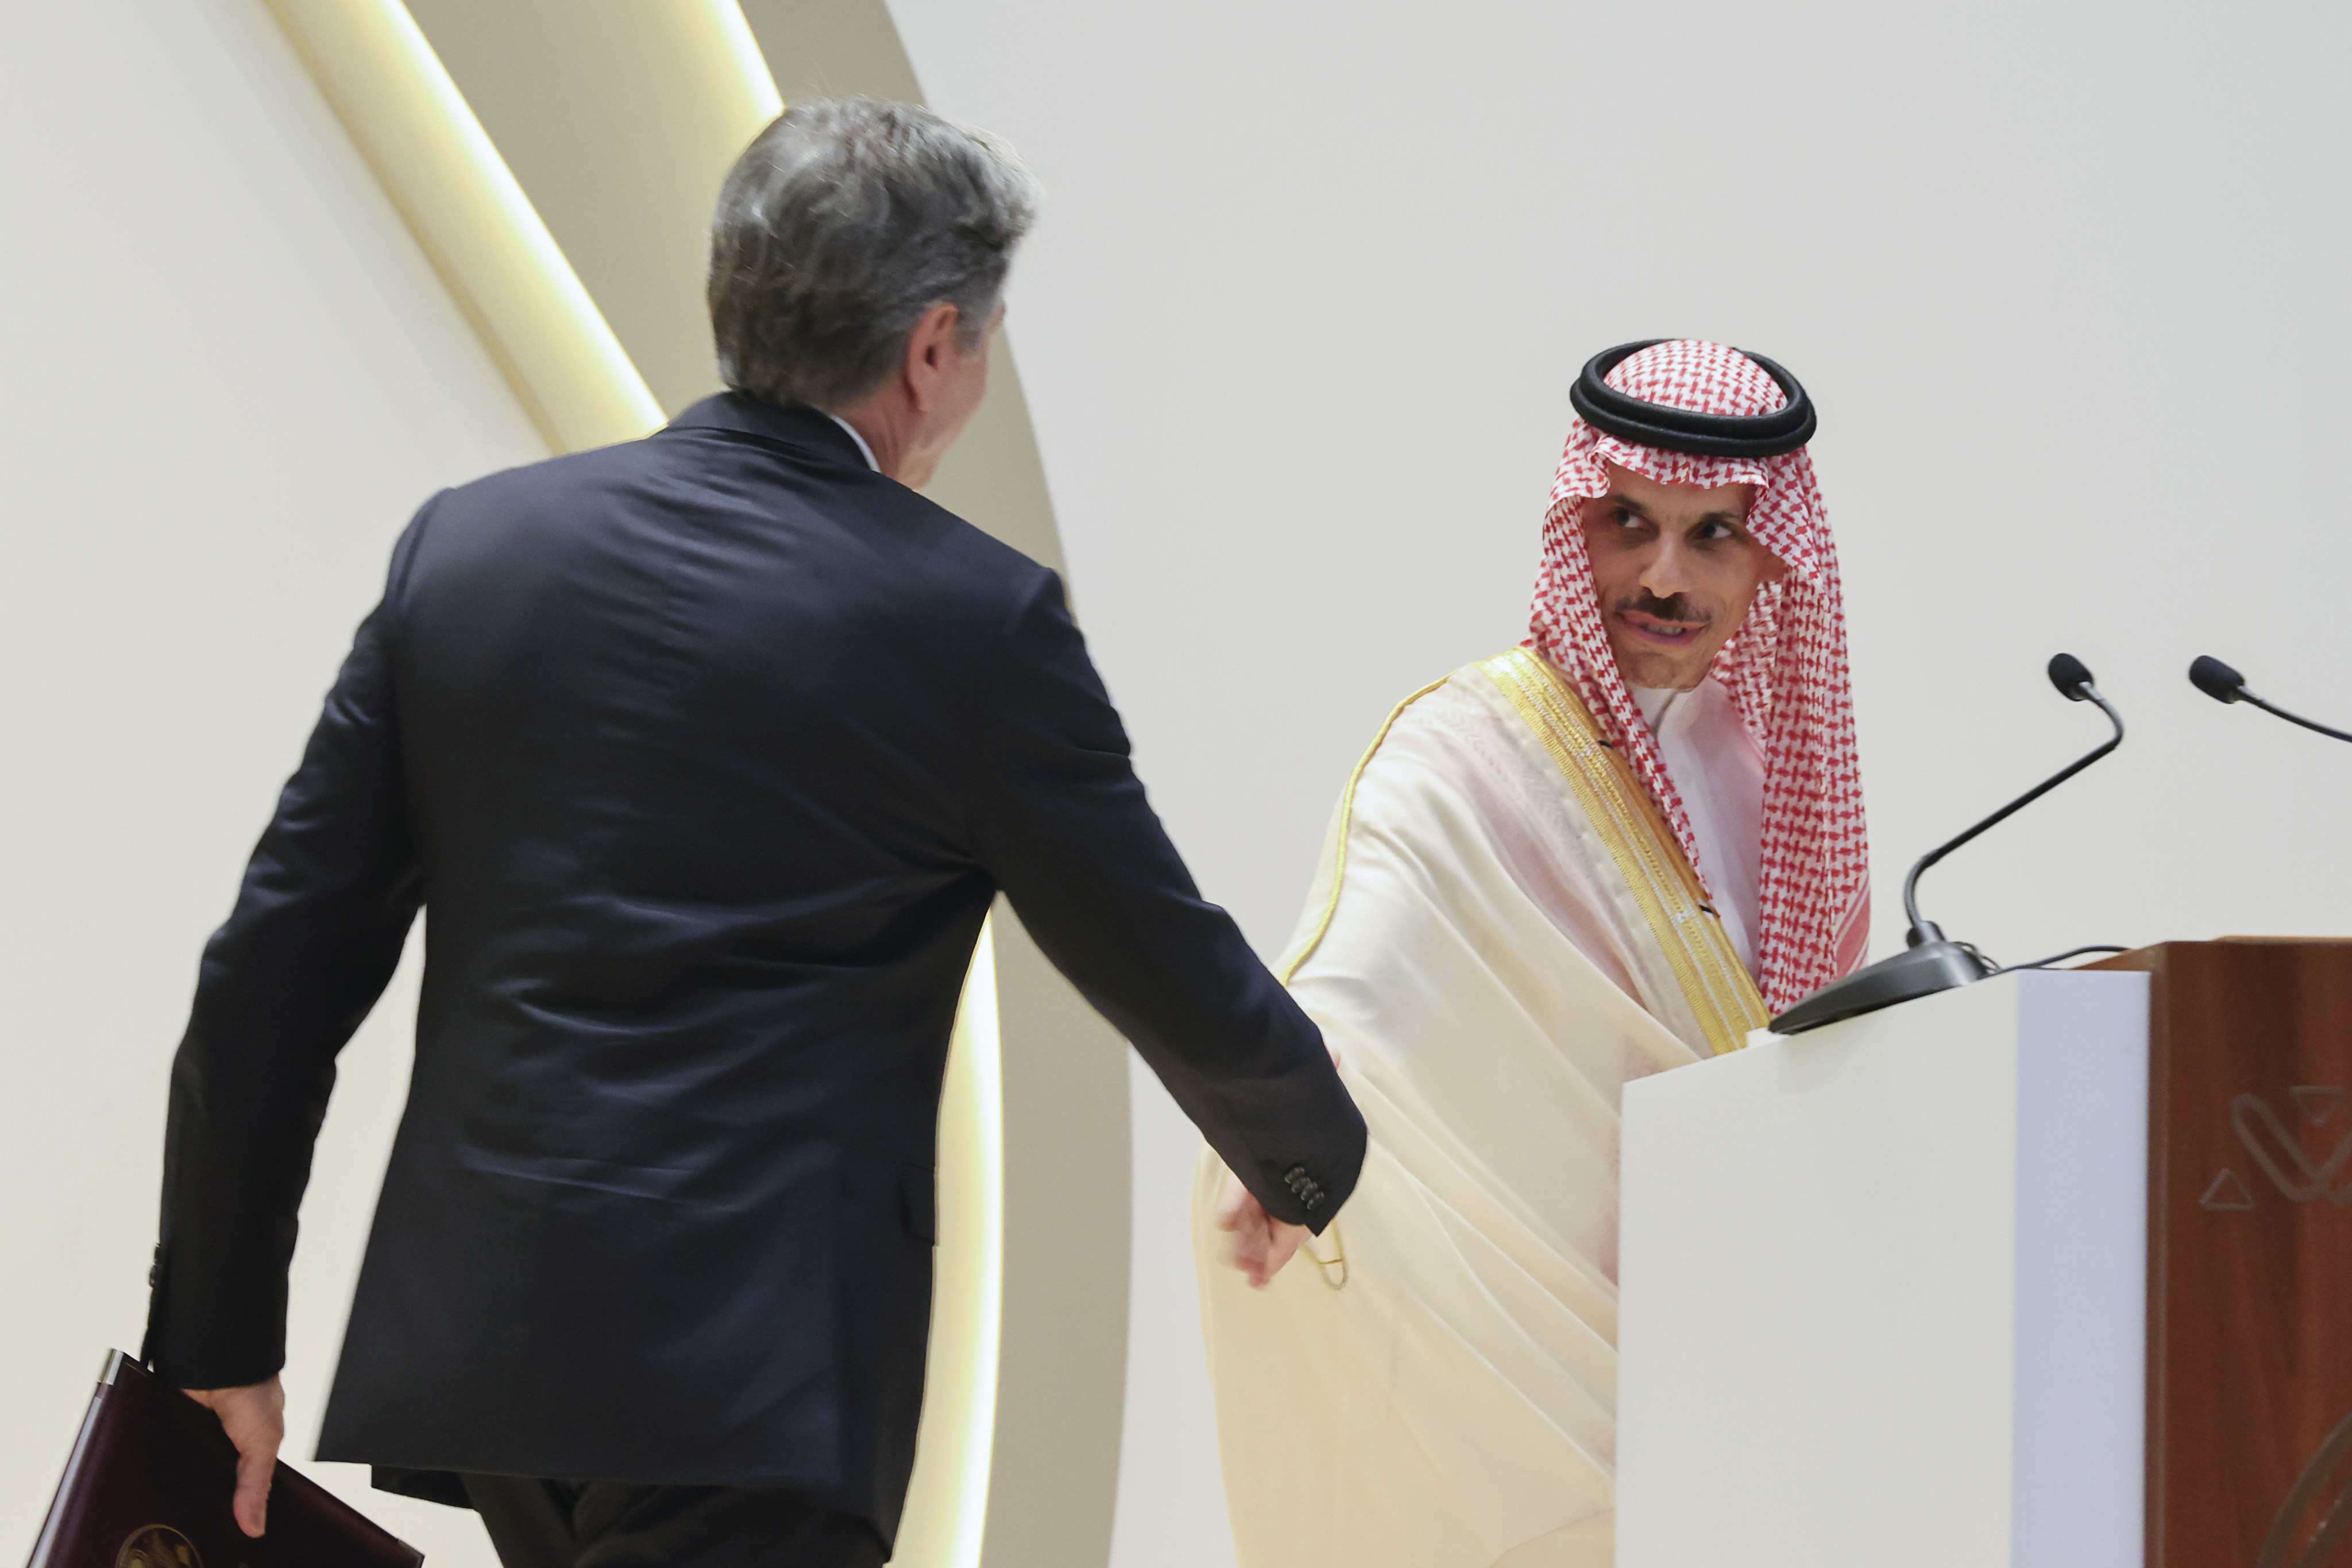 US Secretary of State Antony Blinken (left) shakes hands with Saudi Arabia’s Foreign Minister Prince Faisal bin Farhan during a joint news conference in Riyadh, Saudi Arabia, on June 8. The addition of Saudi Arabia and the UAE brings huge amounts of oil wealth and influence to the Brics grouping but, given their close ties with the United States, also potential complications to diminish the global role of the US and the West. Photo: AP